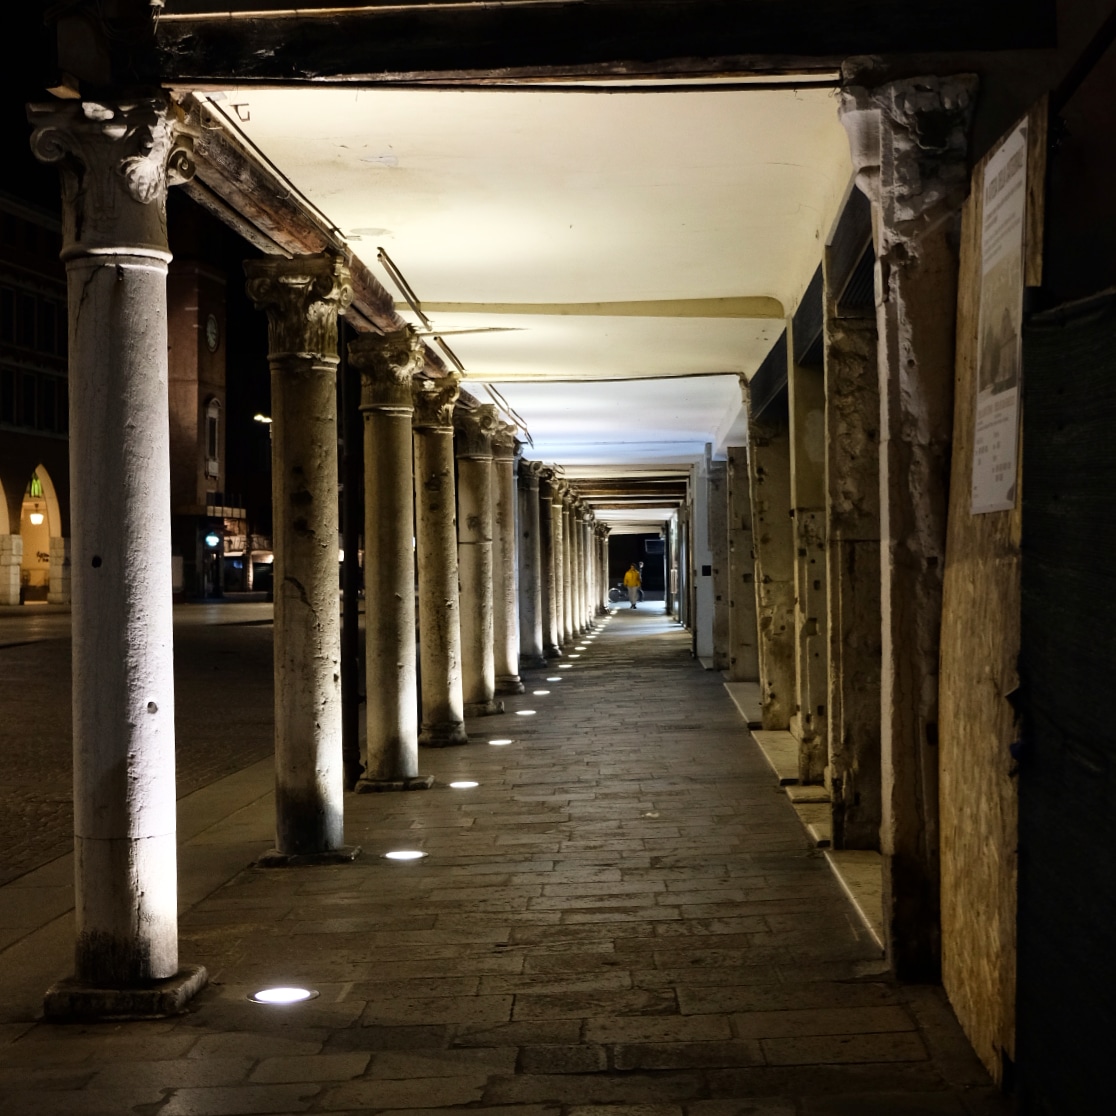 Walking at night for the "Lodge of the Merciai"...